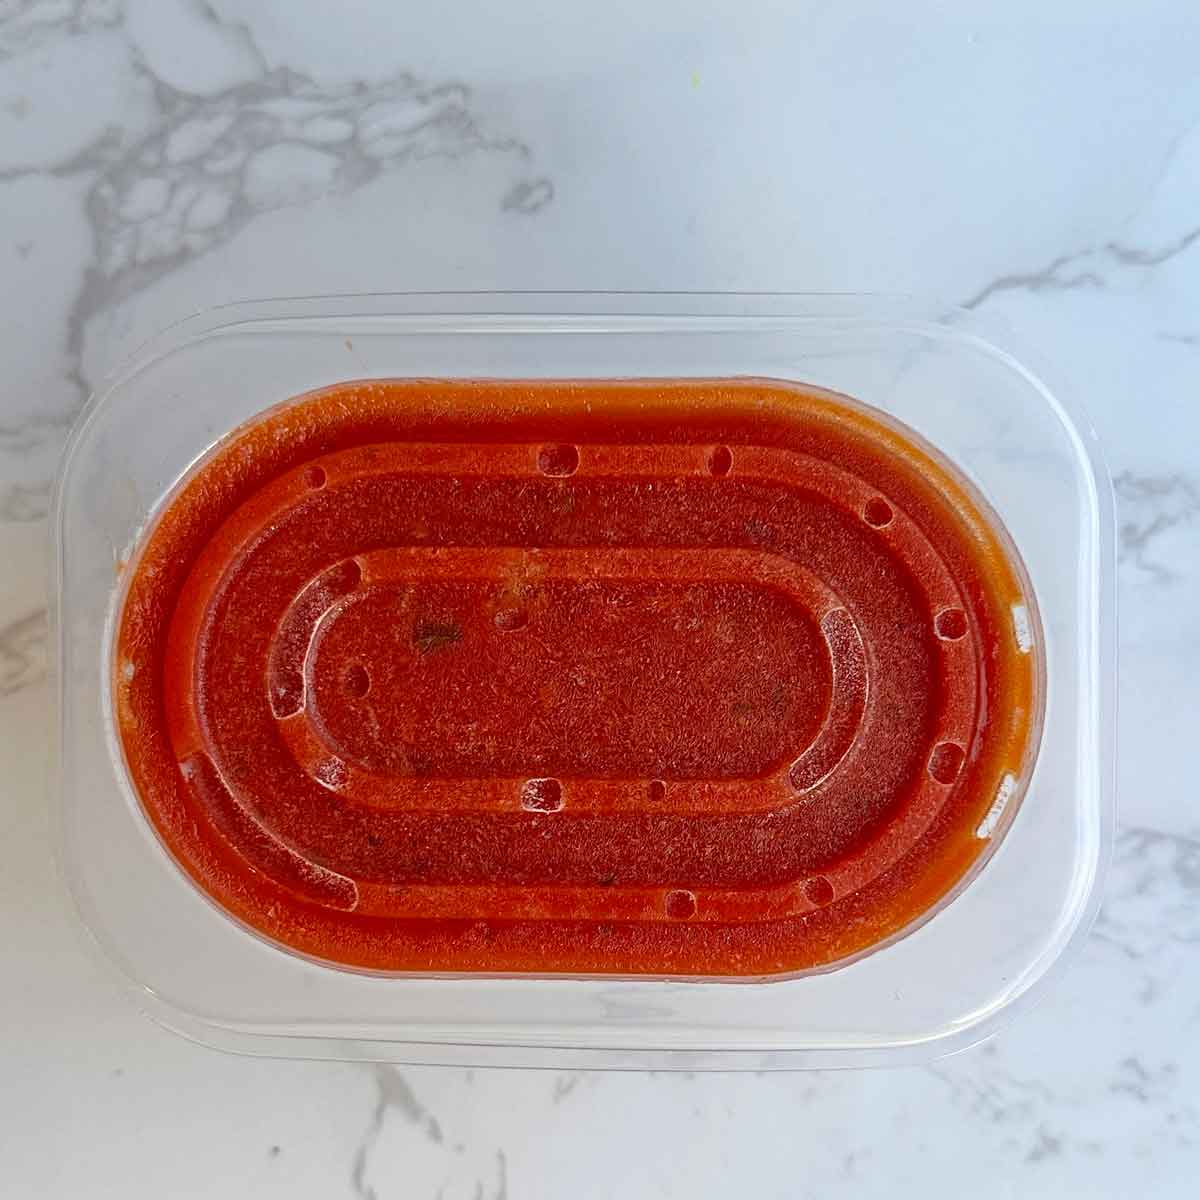 frozen pasta sauce in a container.